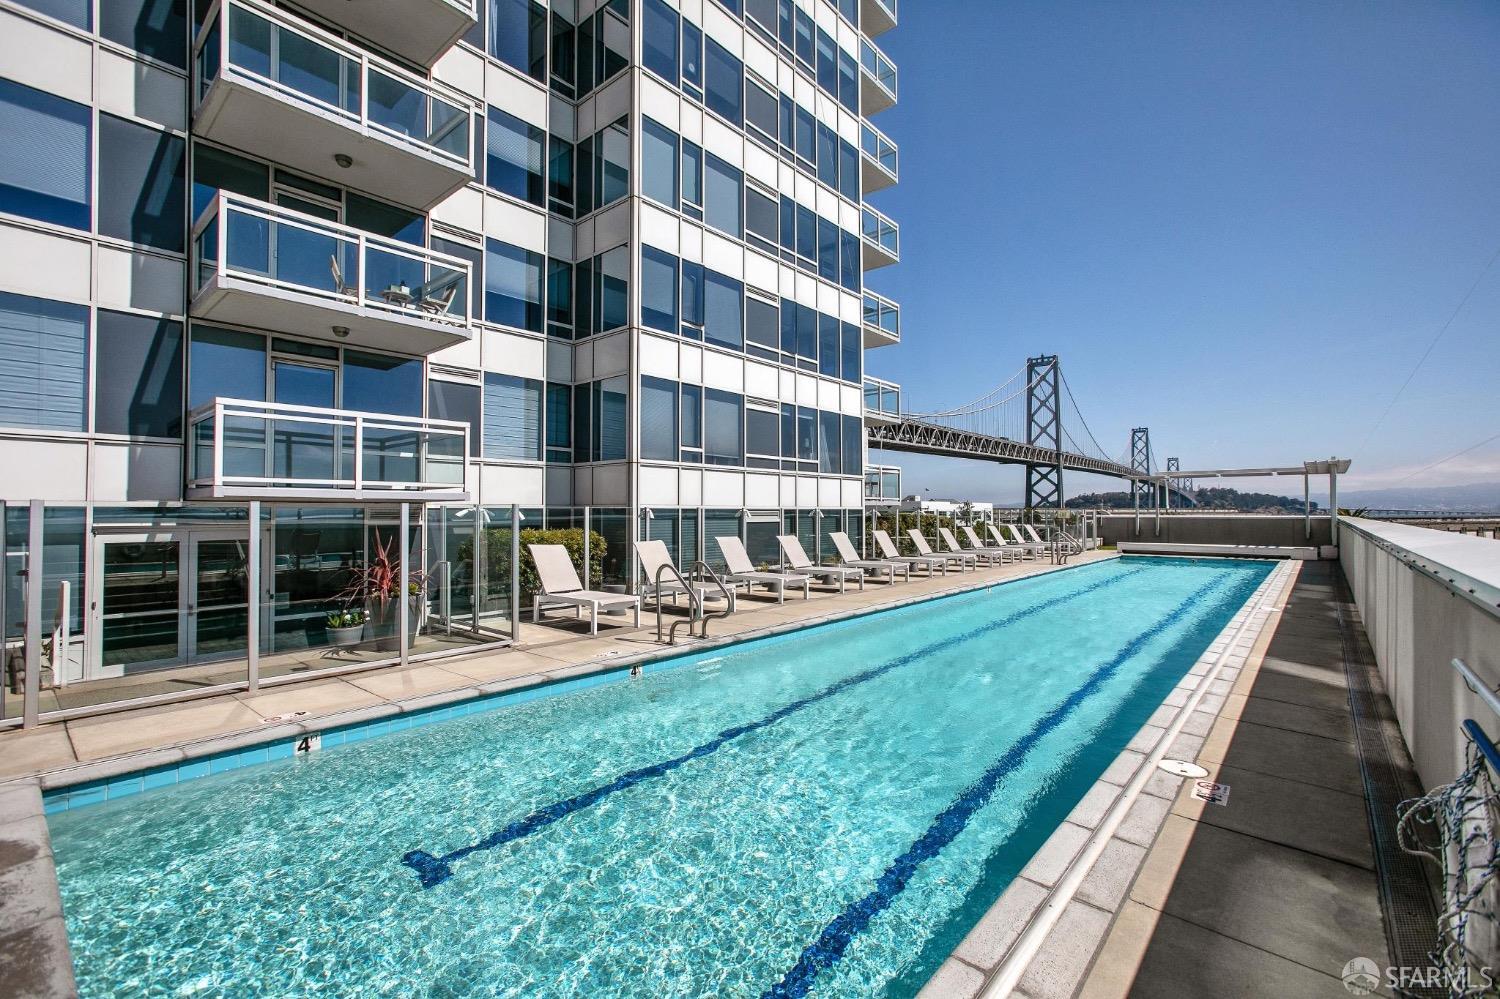 Condos, Lofts and Townhomes for Sale in San Francisco High Rise Condos